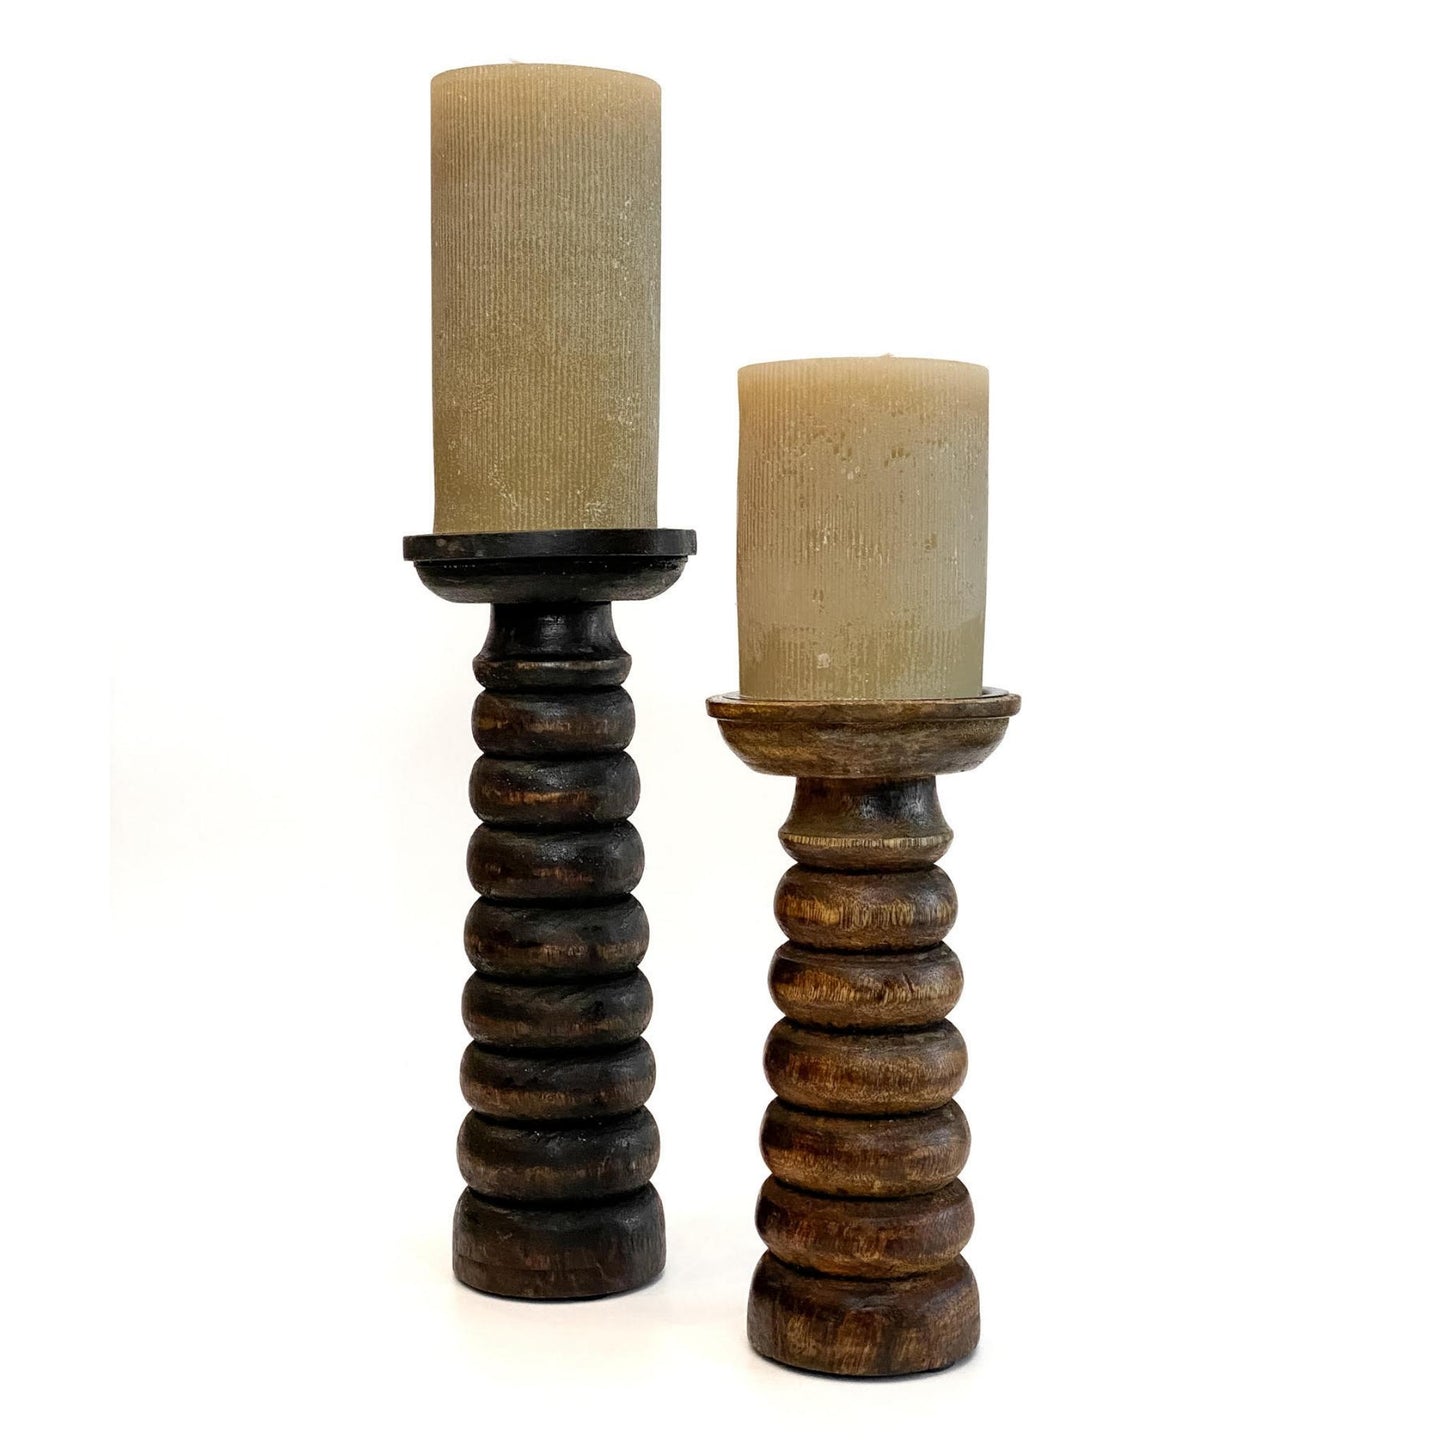 PLEATED PILLAR CANDLE IN LINEN COLOR